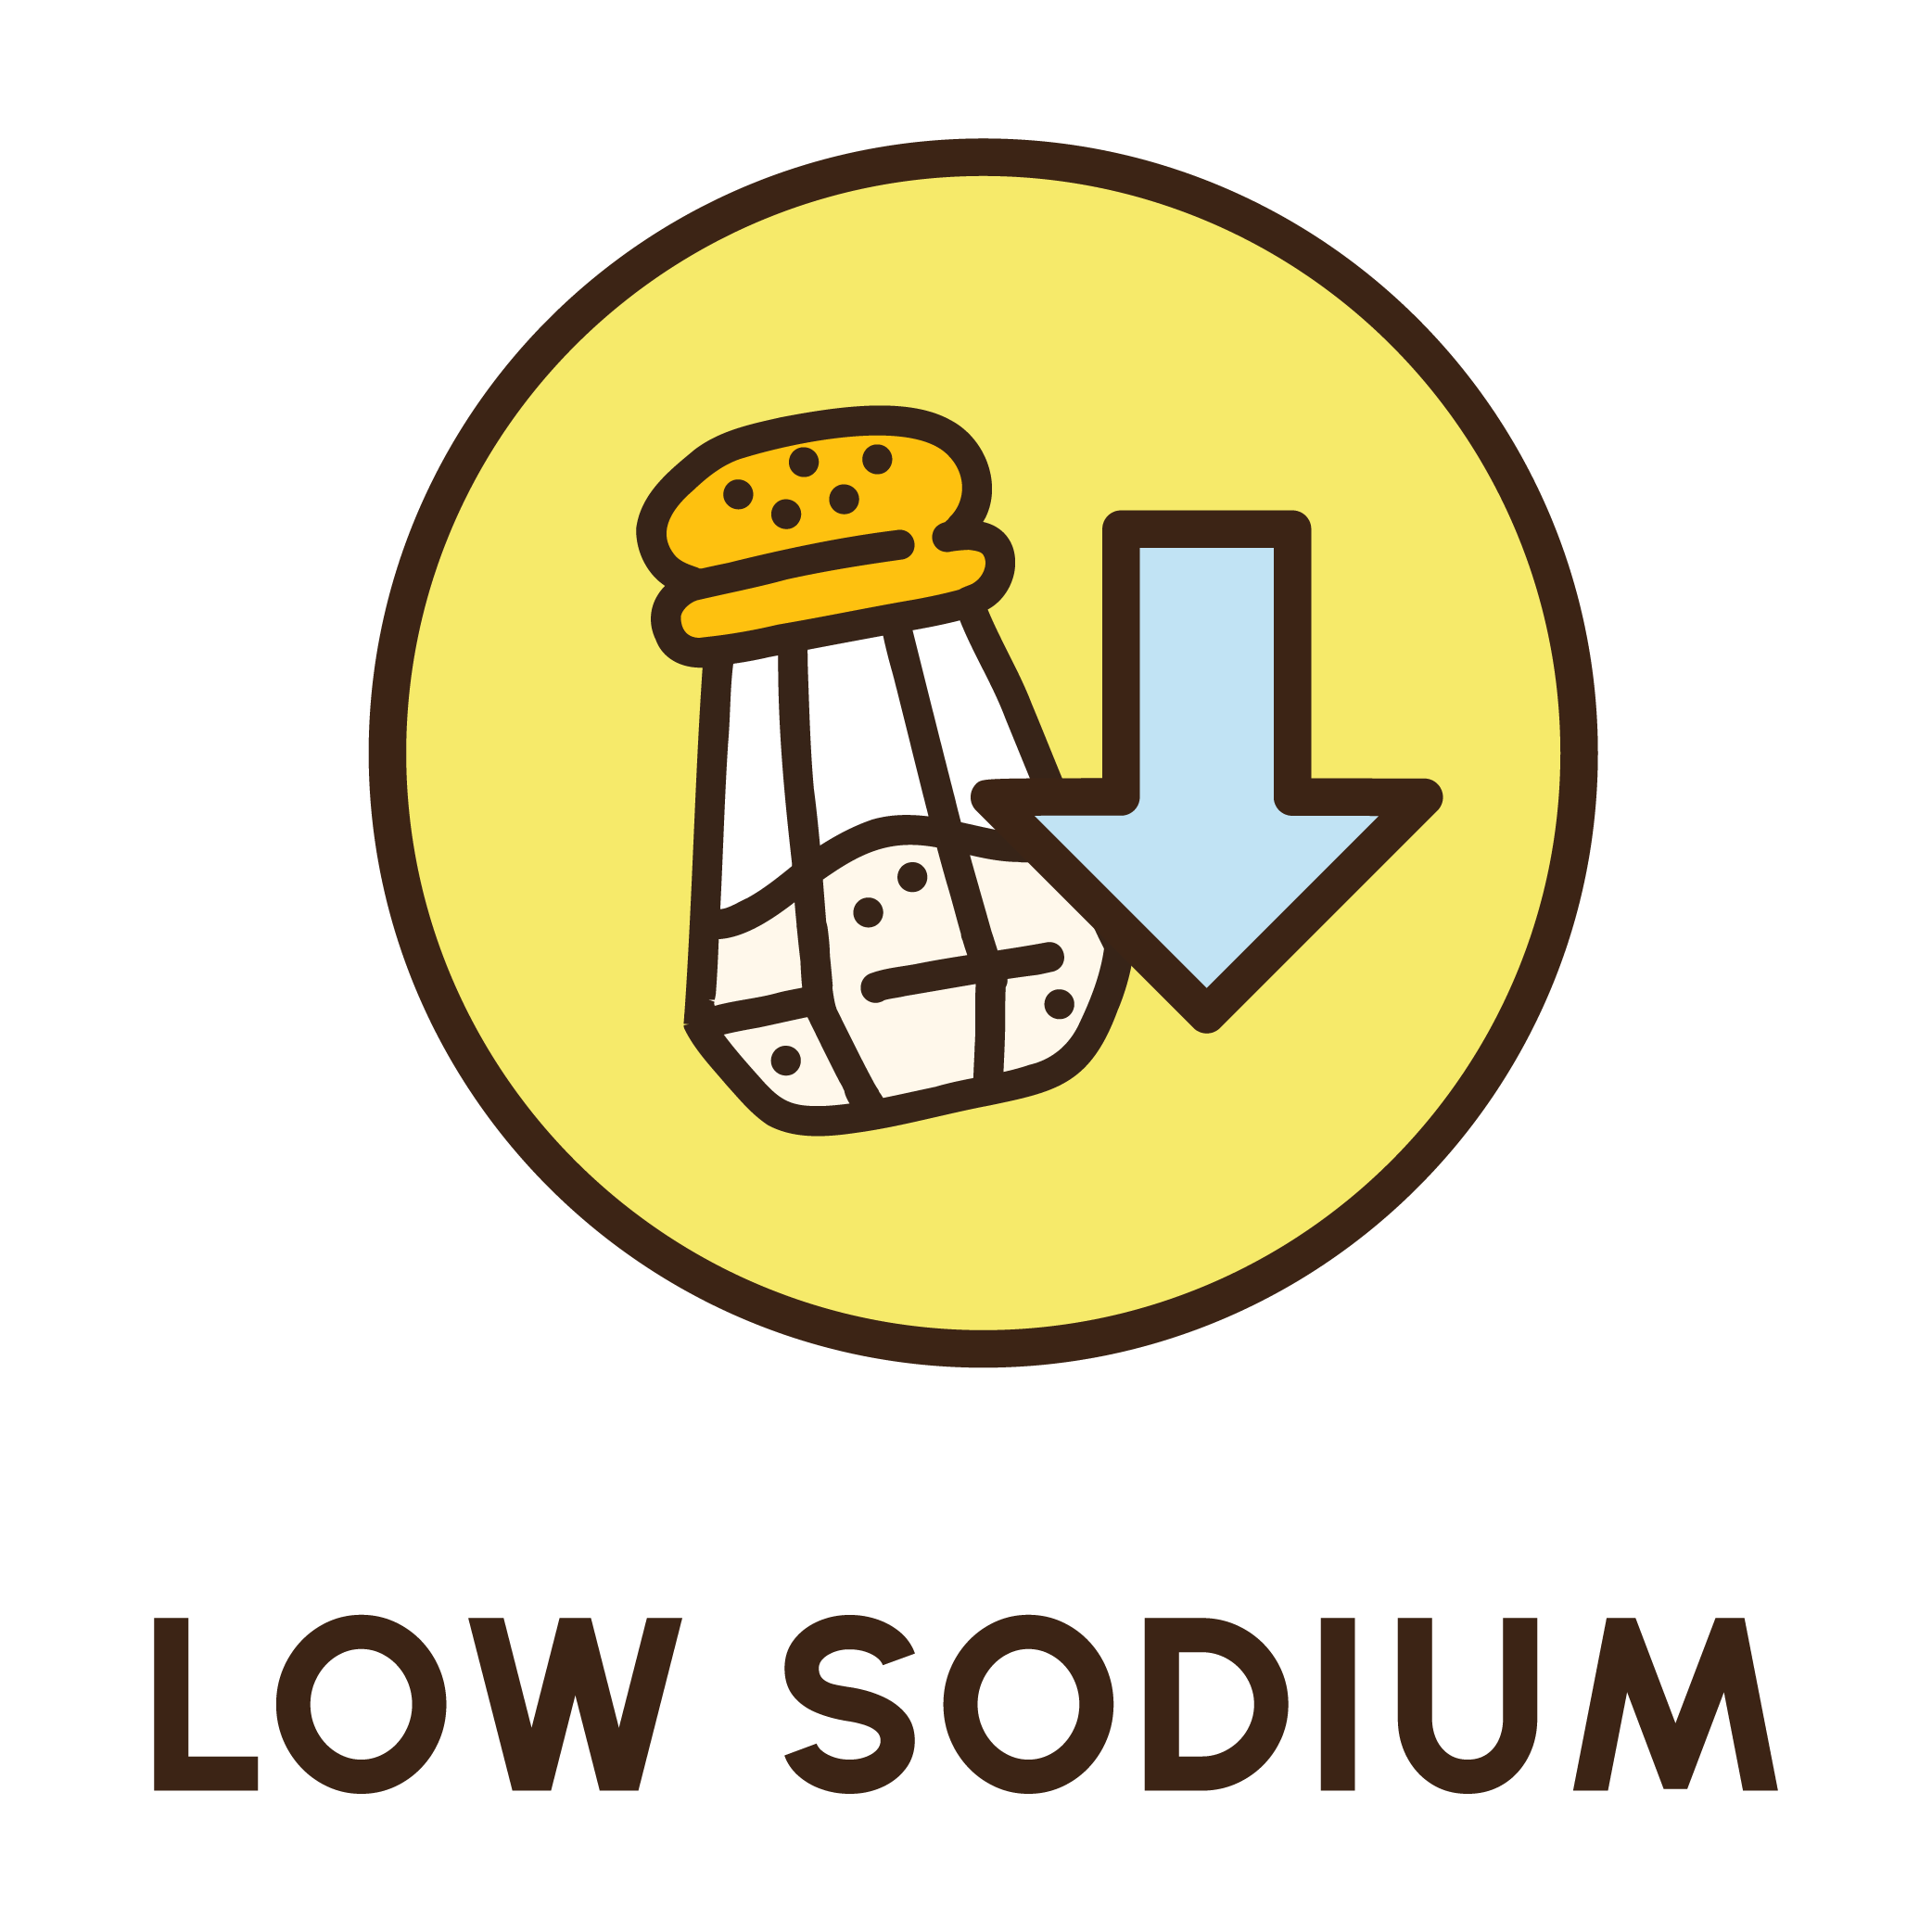 Low Sodium Callout